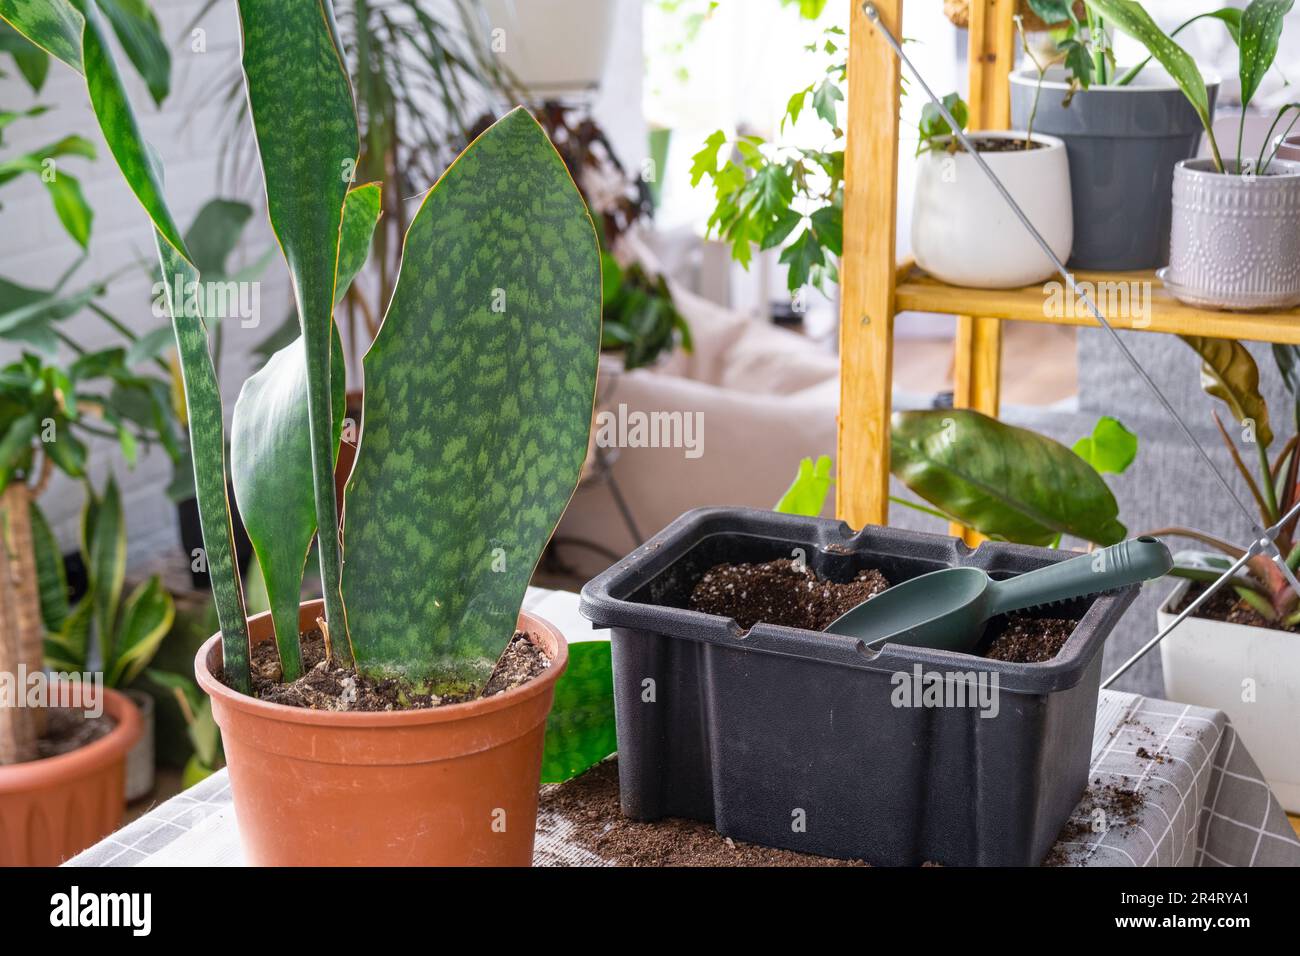 Repotting a home plant succulent sansevieria masoniana big leaf into new pot. Caring for potted plant Stock Photo